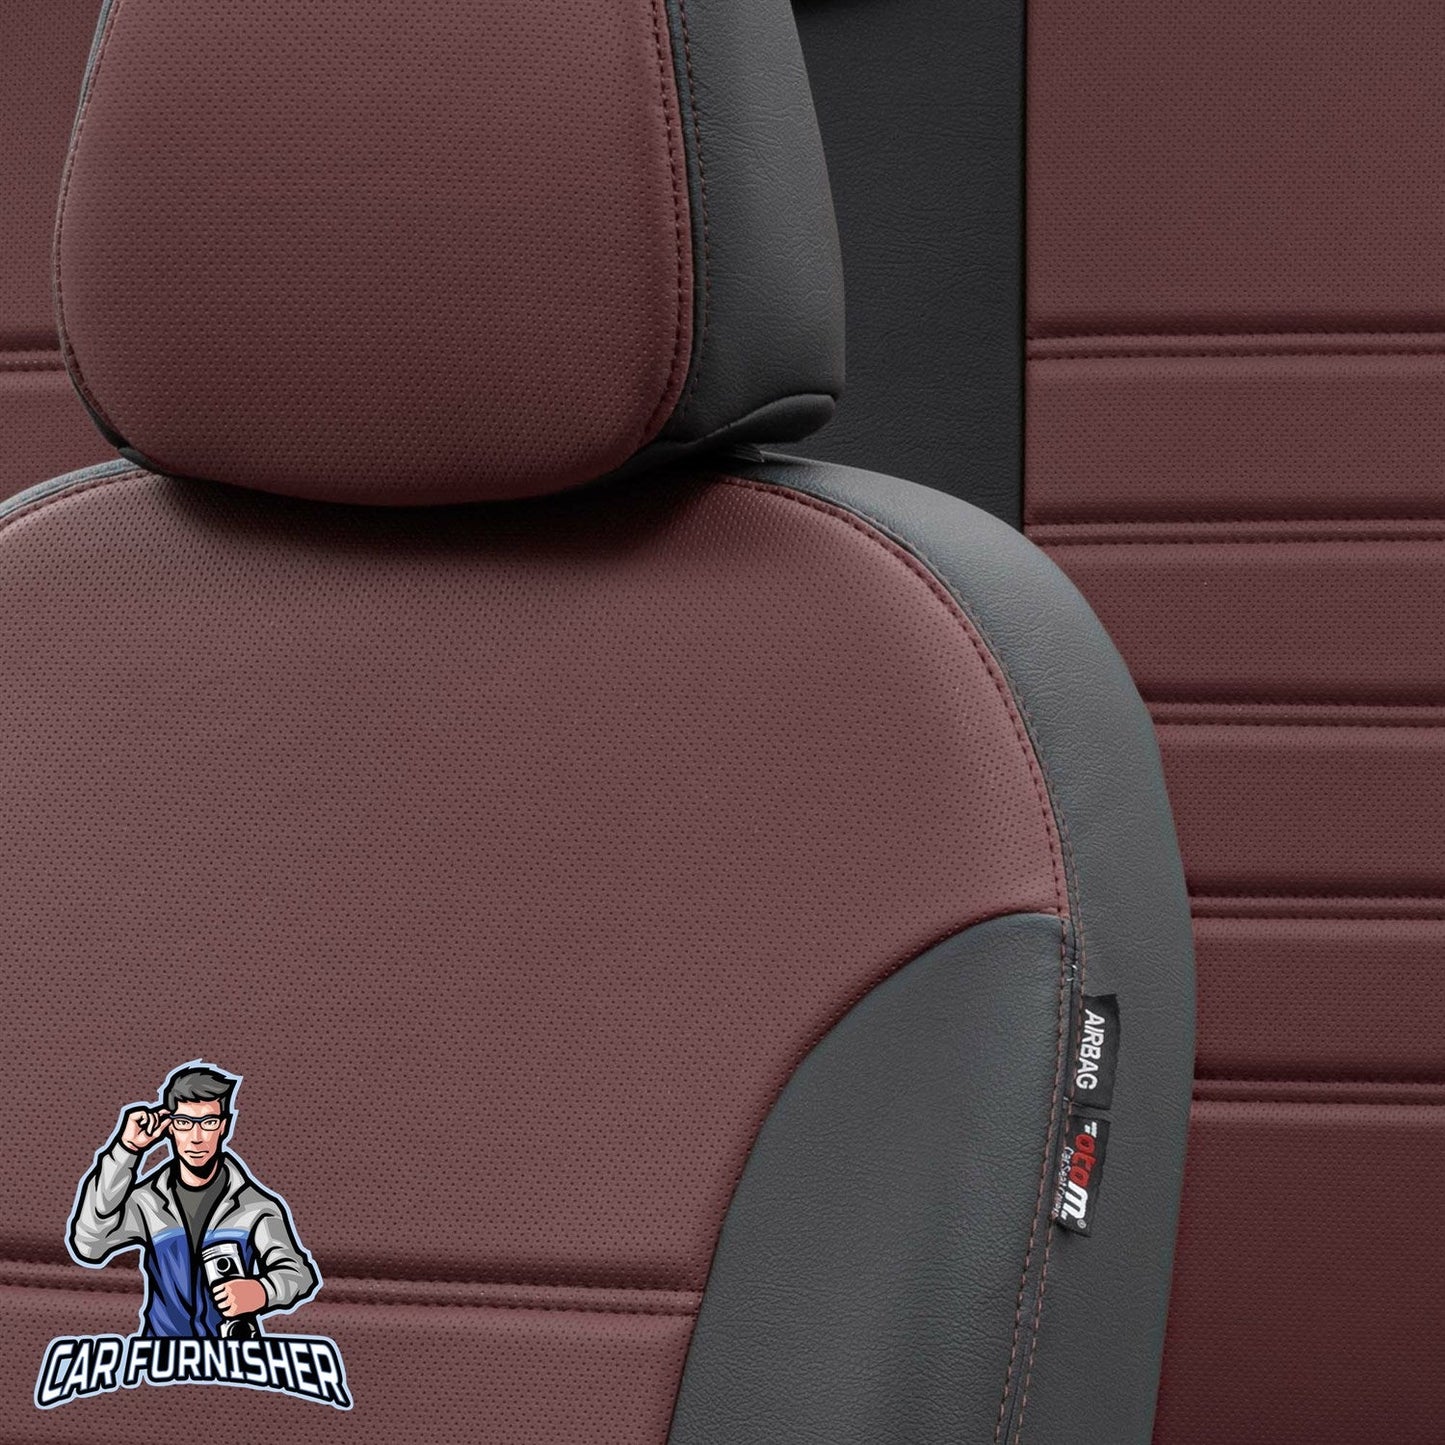 Nissan Primera Seat Covers Istanbul Leather Design Burgundy Leather